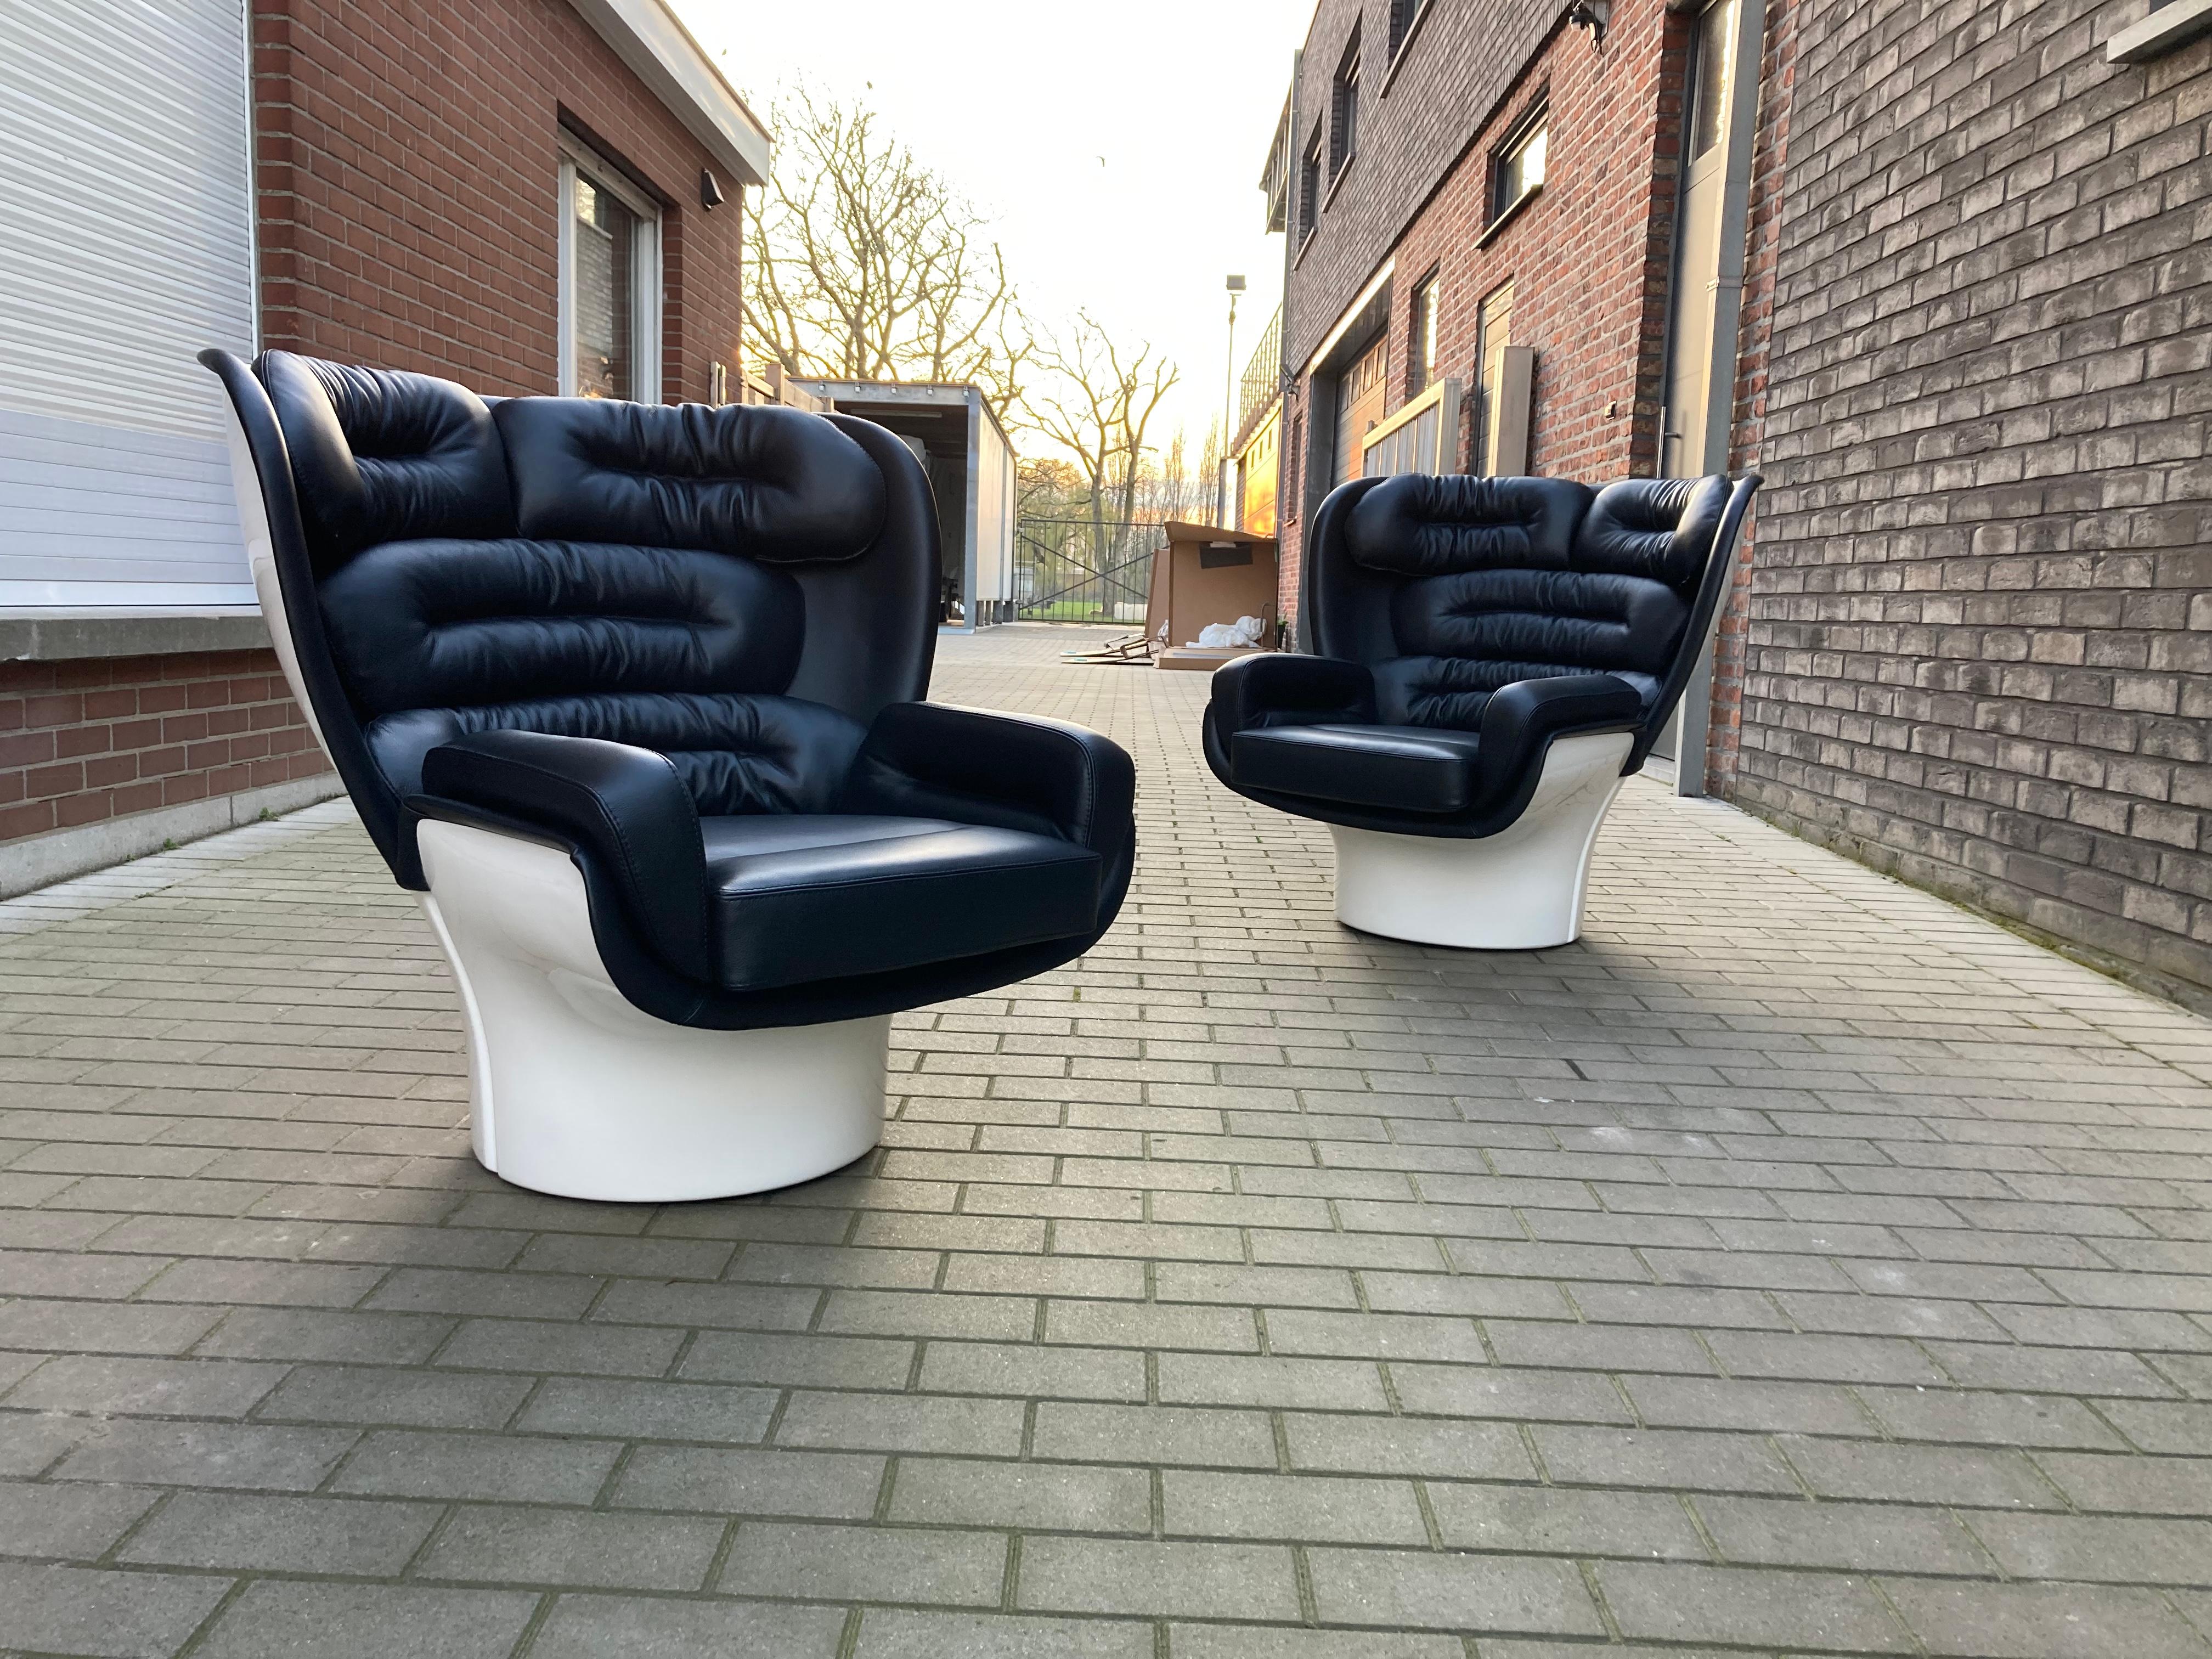 2x Joe Colombo Elda Chair, Black Leather, White Fiberglass Shell In New Condition For Sale In Izegem, BE